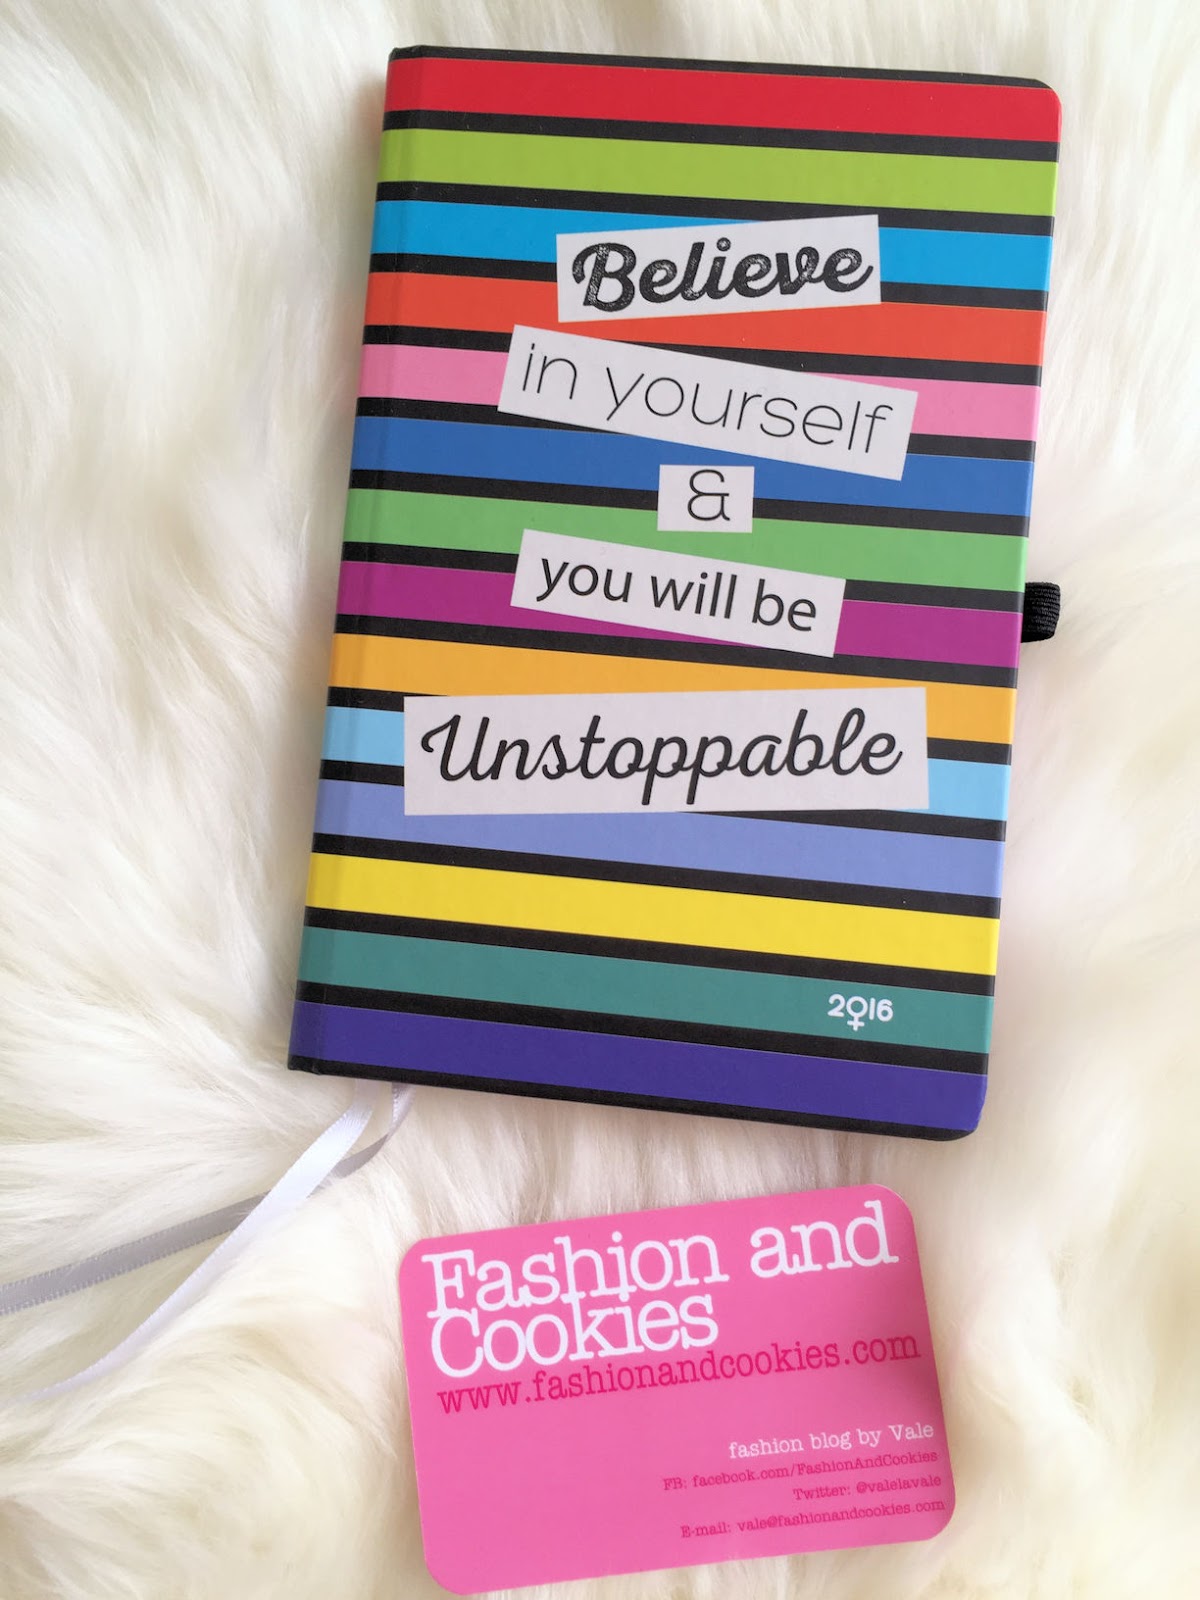 Believe in yourself women's planner 2016 on Fashion and Cookies fashion blog, fashion blogger